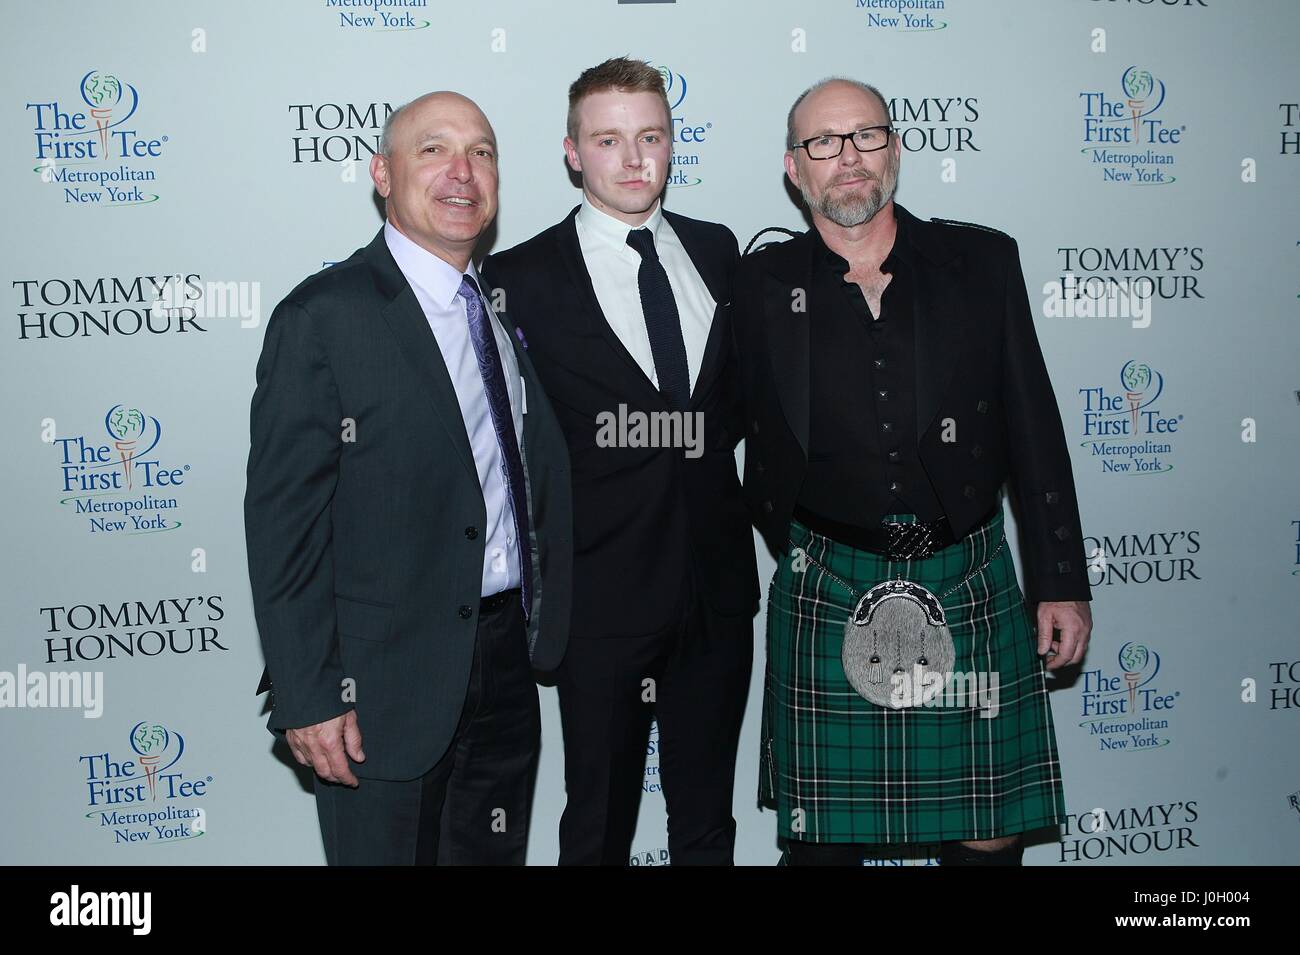 New York, NY, USA. 12th Apr, 2017. Jack Lowden and Jason Connery at 'Tommy's Honour' New York Screening at AMC Loews Lincoln Square 13 Theater on April 12, 2017 in New York City. Credit: Diego Corredor/Media Punch/Alamy Live News Stock Photo